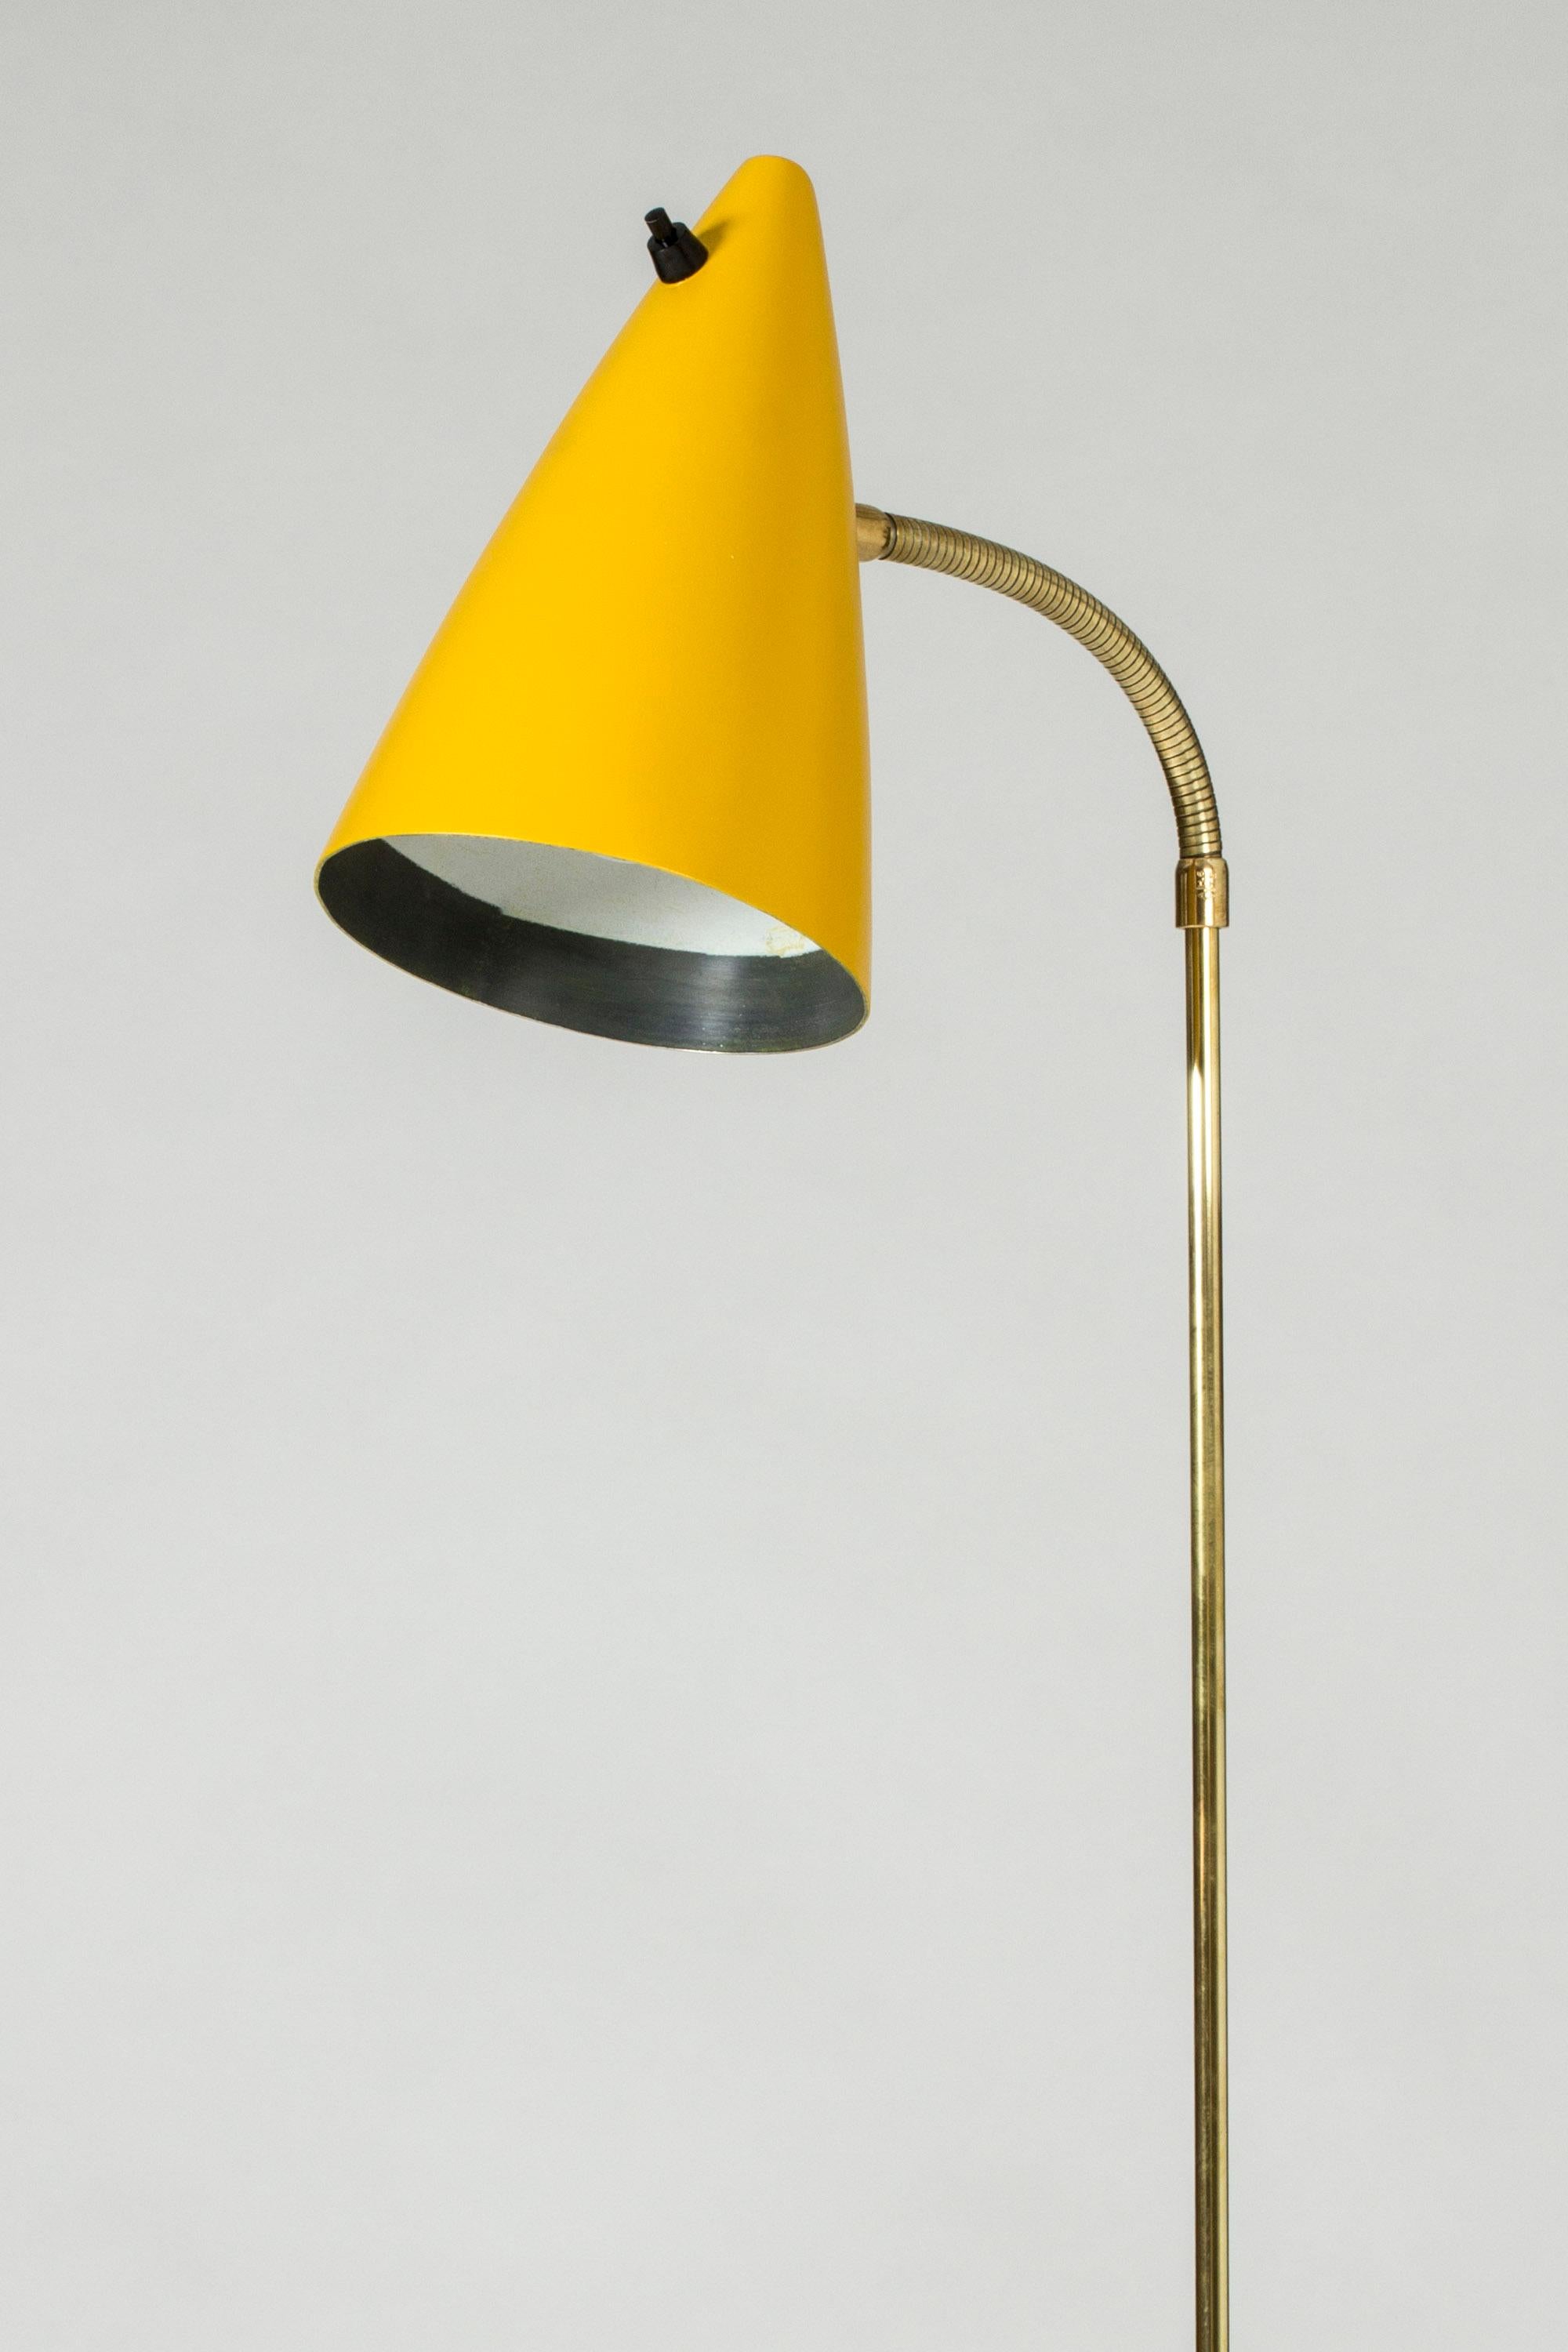 Cool floor lamp from Falkenbergs Belysning, with elegant brass details. Easy to move thanks to the little handle on the stem. Partially lacquered black, with a warm yellow shade.